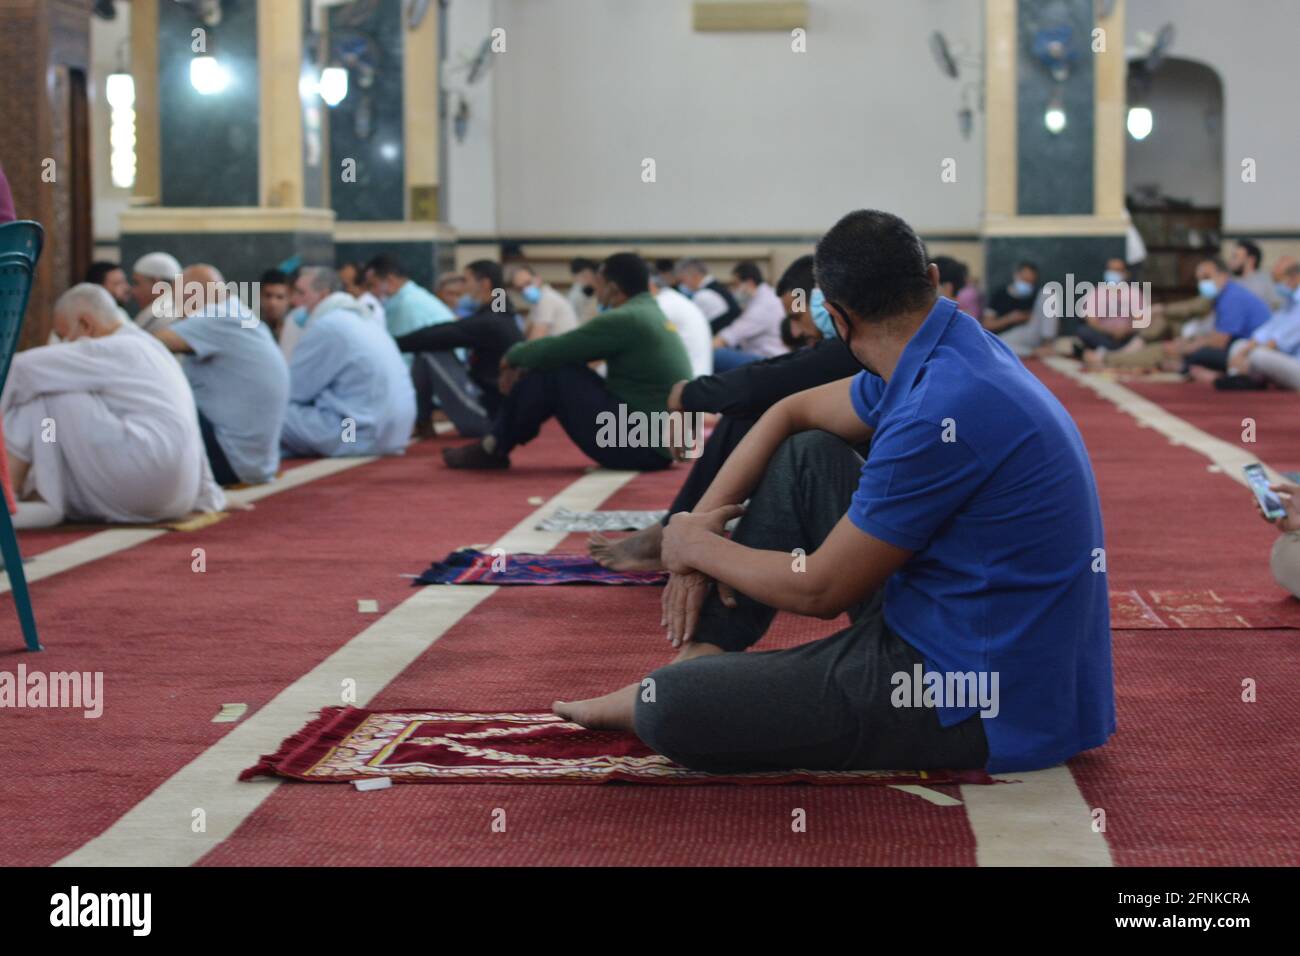 Muslims perform first Eid Al-Fitr prayers at mosques in Covid-19 pandemic era under the recent anti-coronavirus safety measures in large-sized mosques Stock Photo